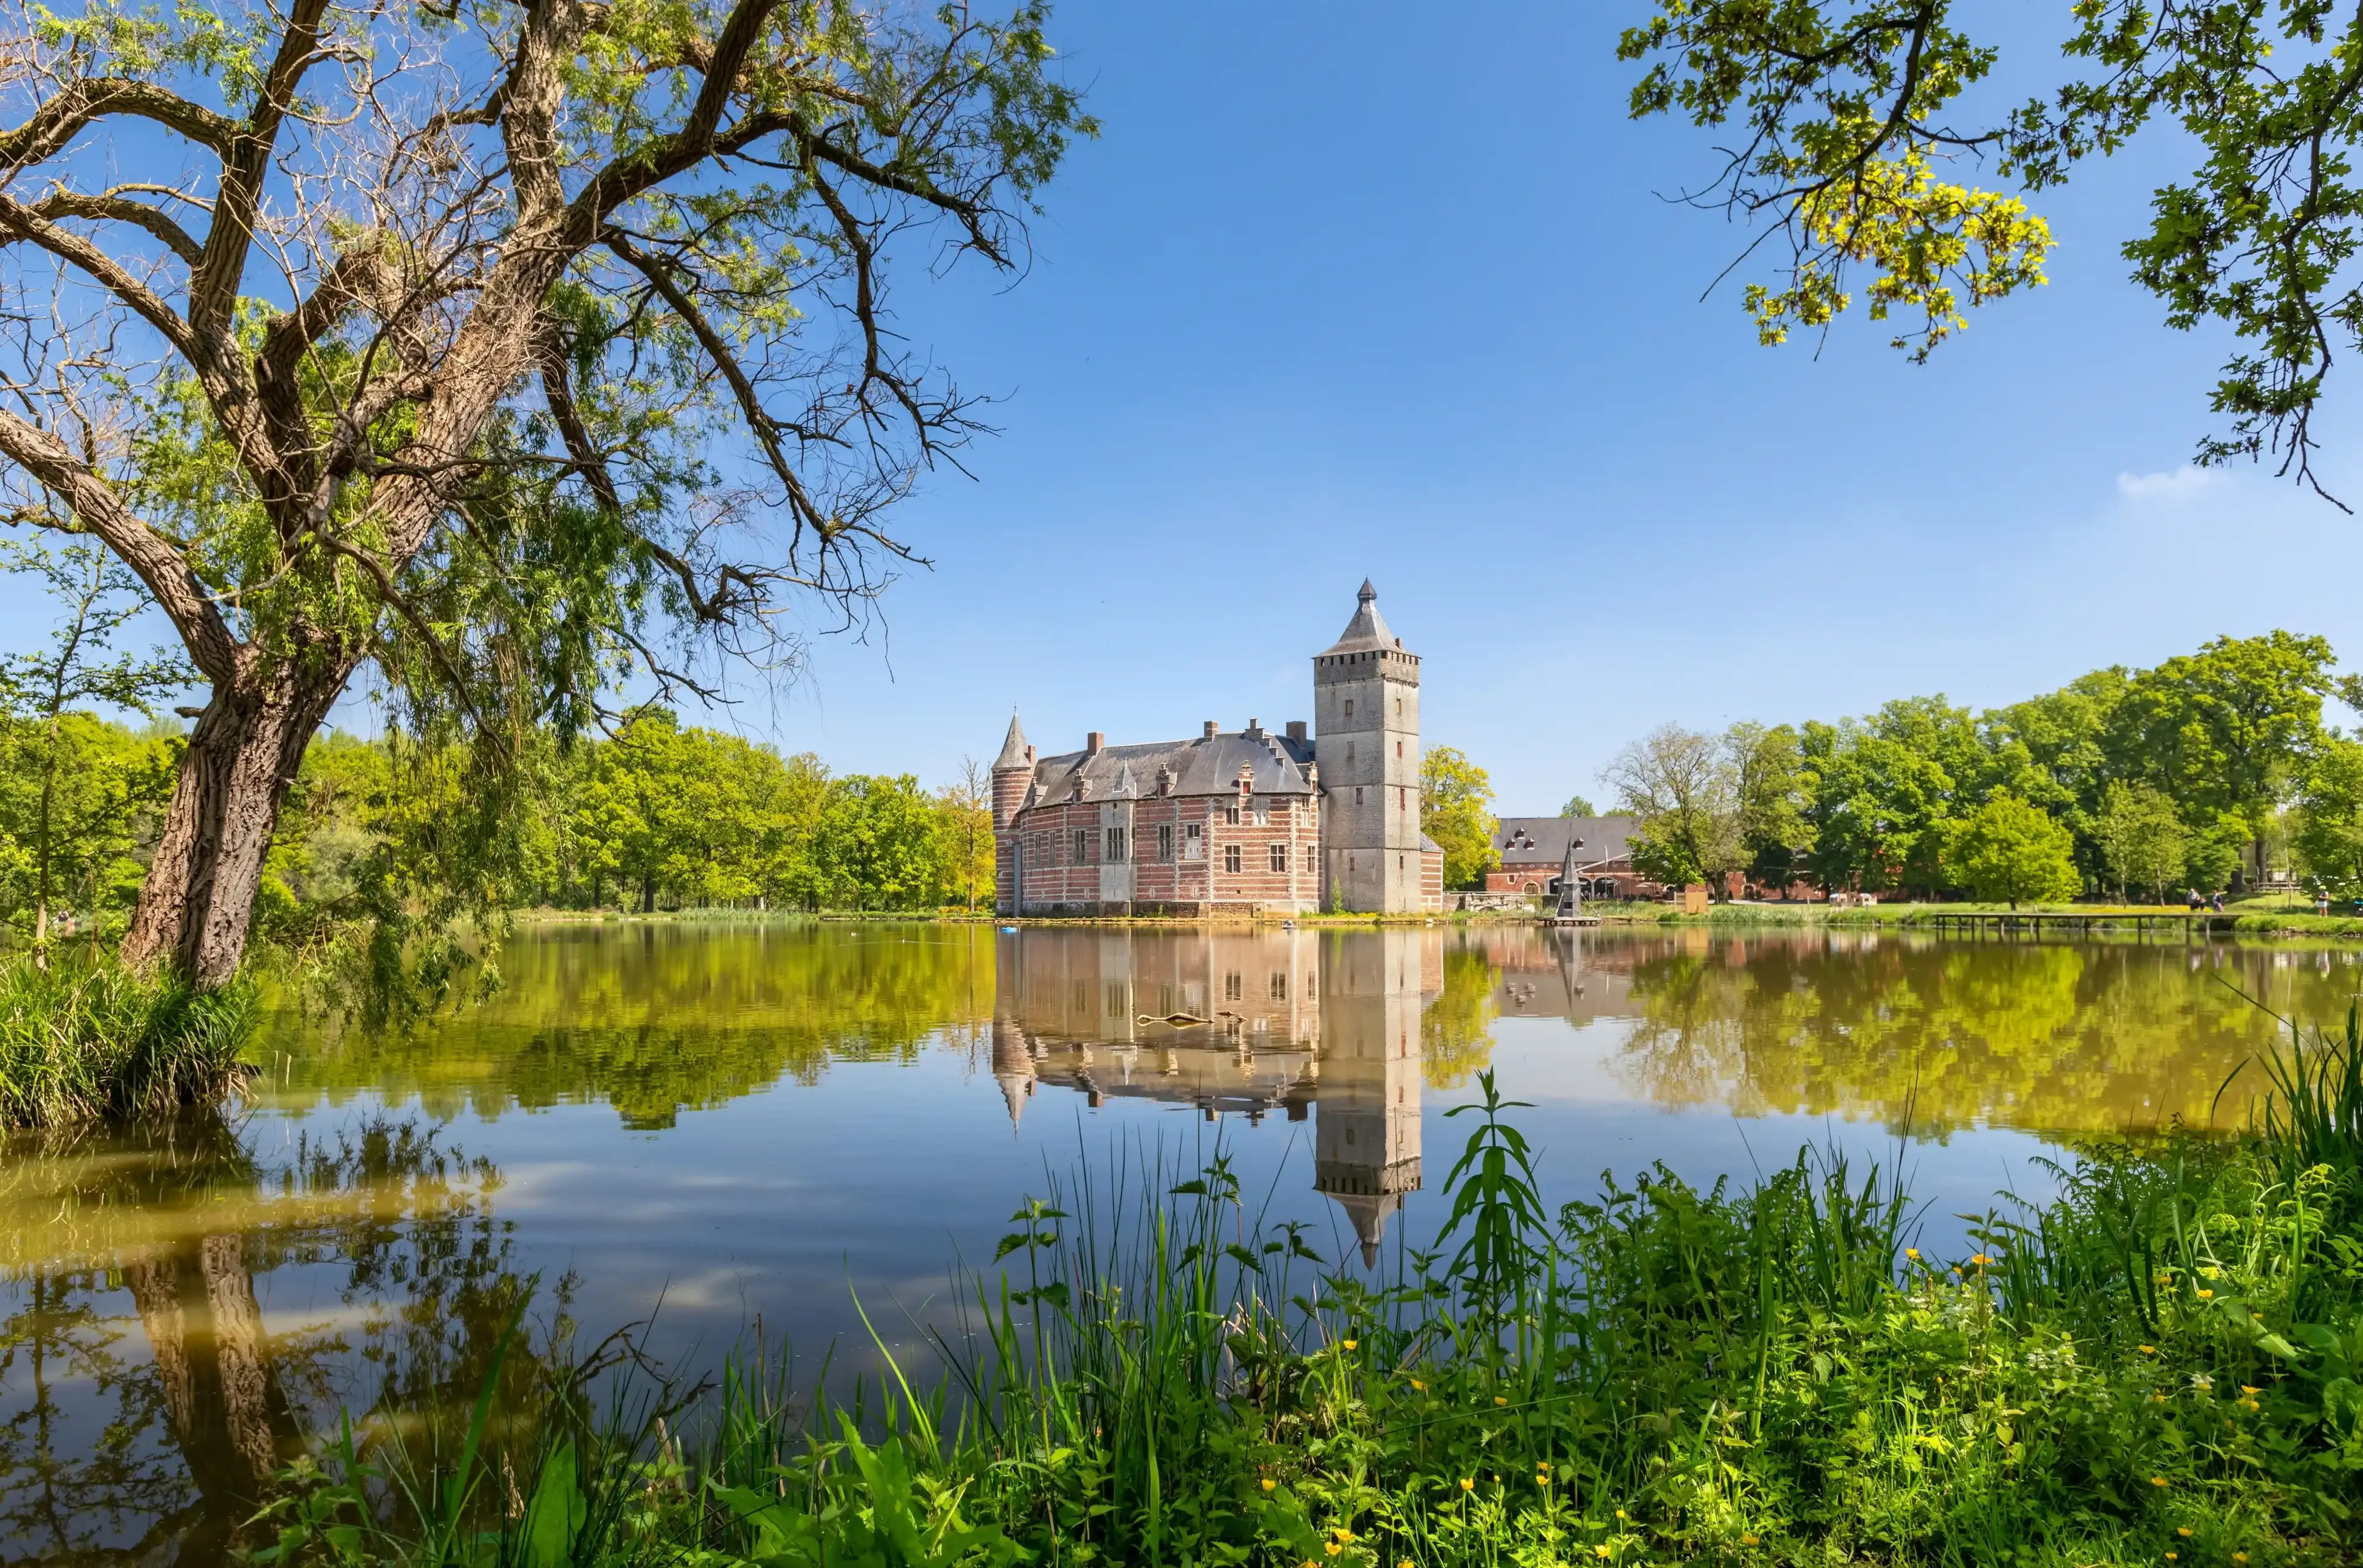 Holsbeek, Belgium - May 06 2022: View of historic Castle Van Horst with lake and park in summer day